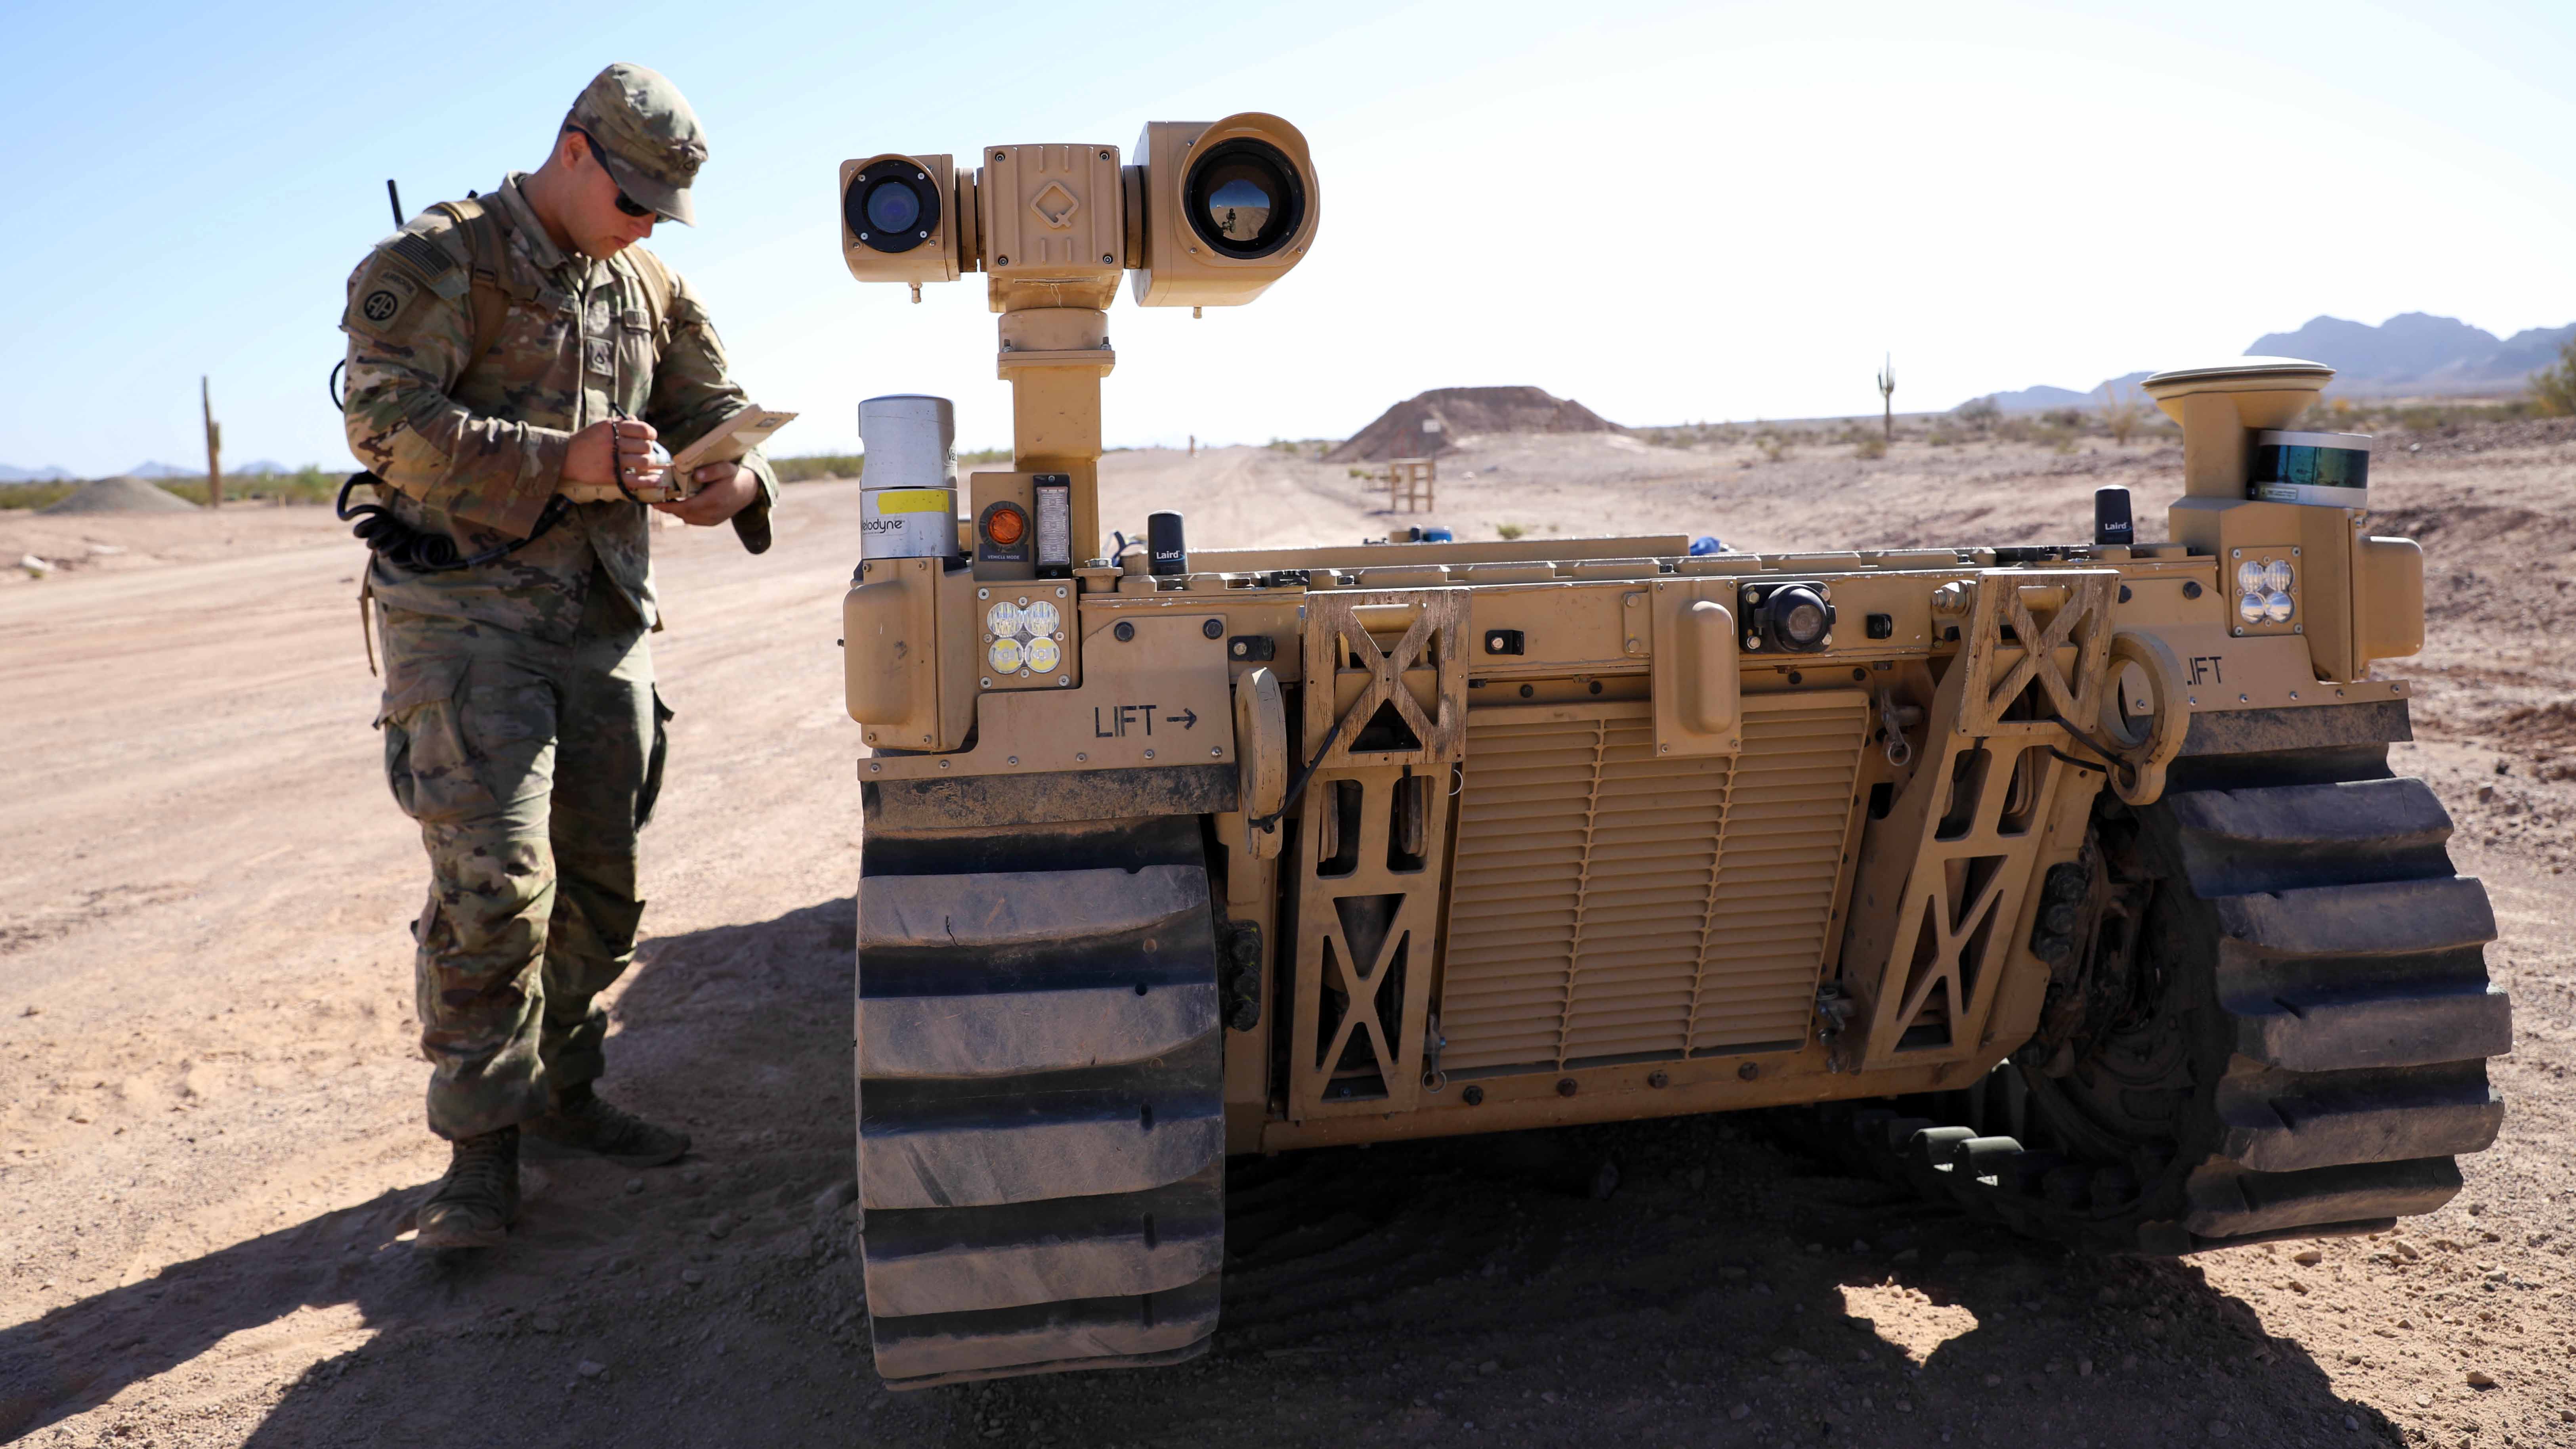 Soldier with robot vehicle